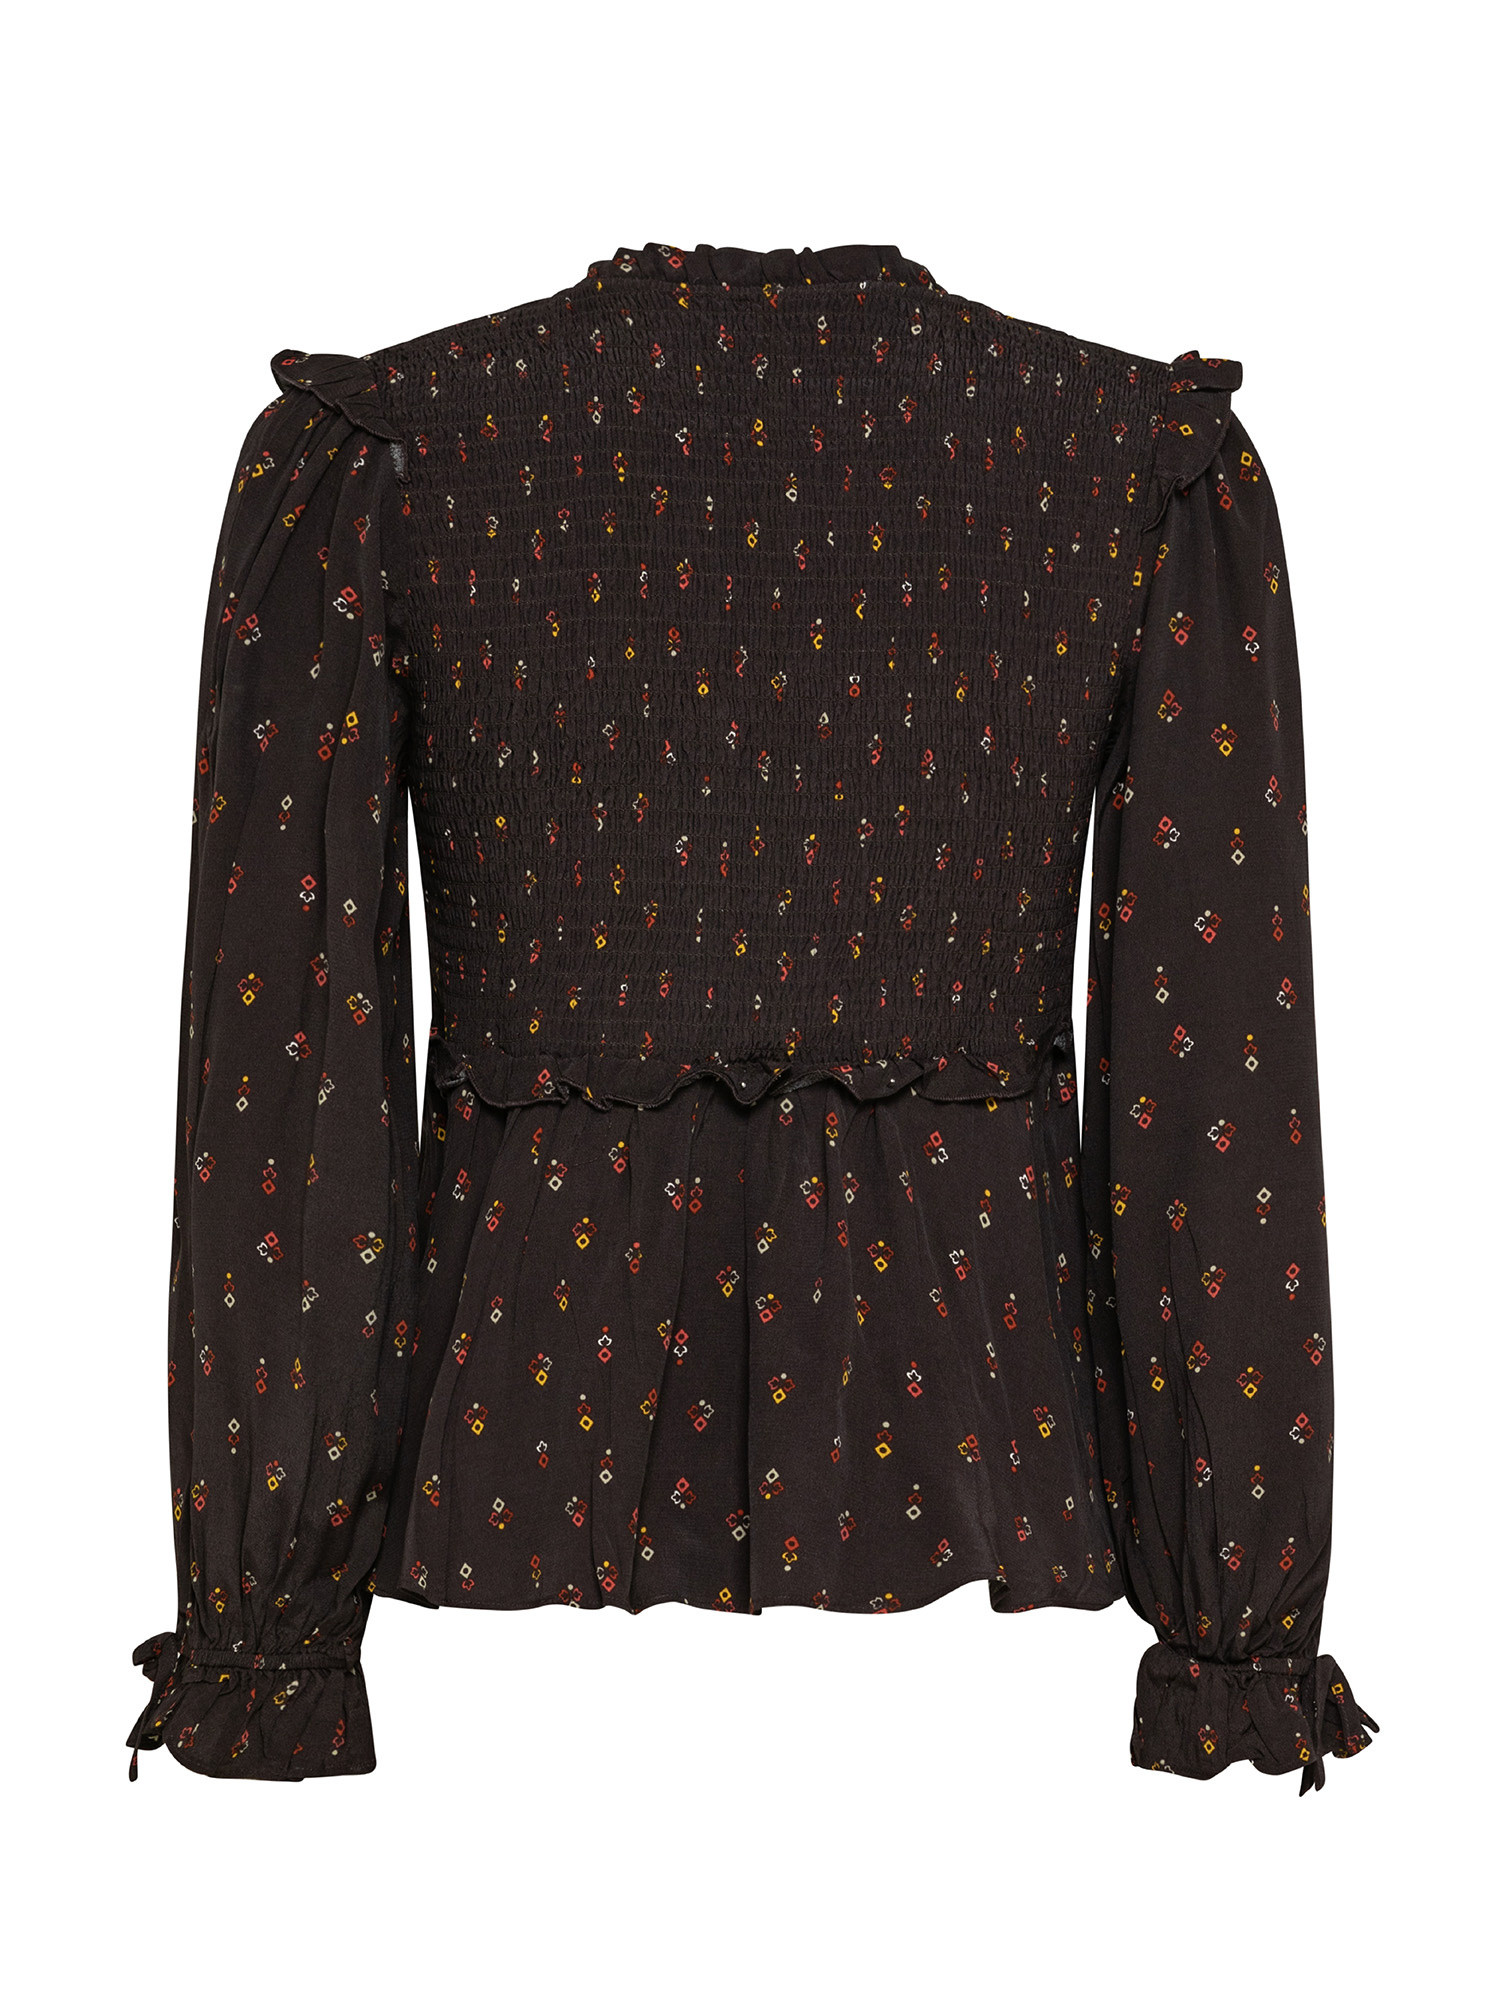 Nany honeycomb blouse, Brown, large image number 1